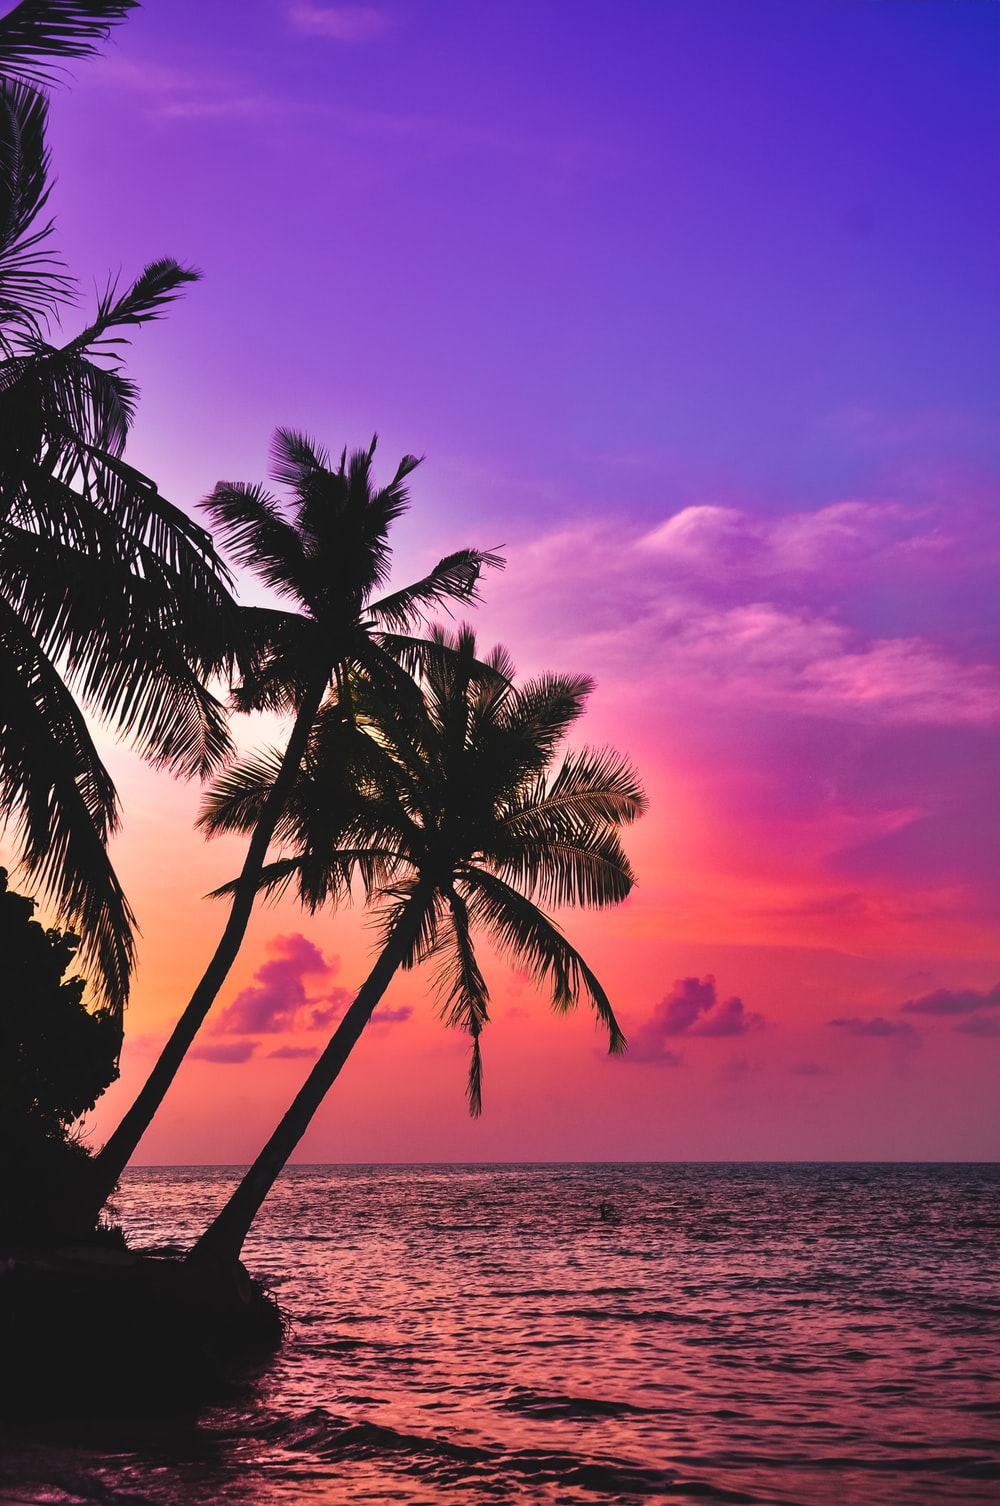 Tropical Sunrise Picture. Download Free Image